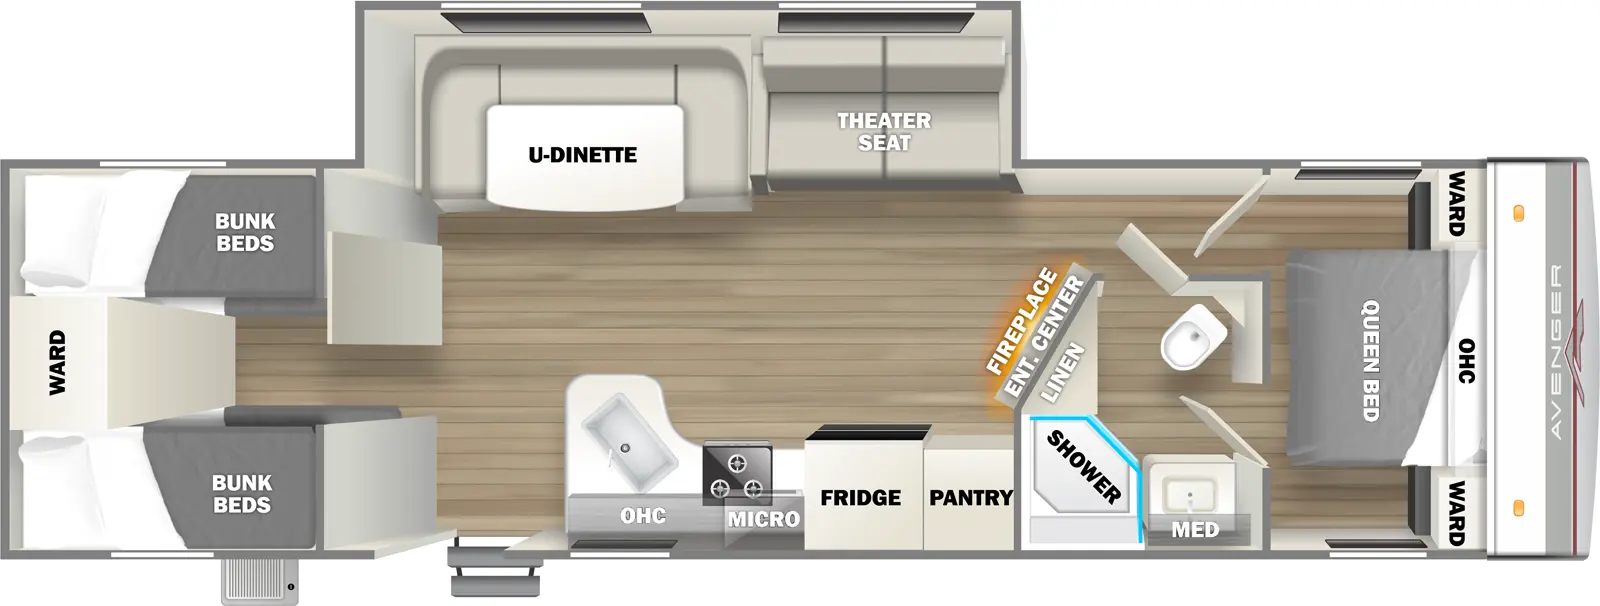 The 29QBS has one entry and one slideout. Interior layout front to back: foot-facing queen bed with overhead cabinet and wardrobes on each side; door side full pass through bathroom with linen closet and medicine cabinet; angled entertainment center with fireplace below; off-door side slideout with theater seat and u-dinette; door side pantry, refrigerator, microwave, cooktop, overhead cabinet, peninsula kitchen counter with sink, and entry; rear bunk room with bunk beds on each side and wardrobe on rear wall in between.